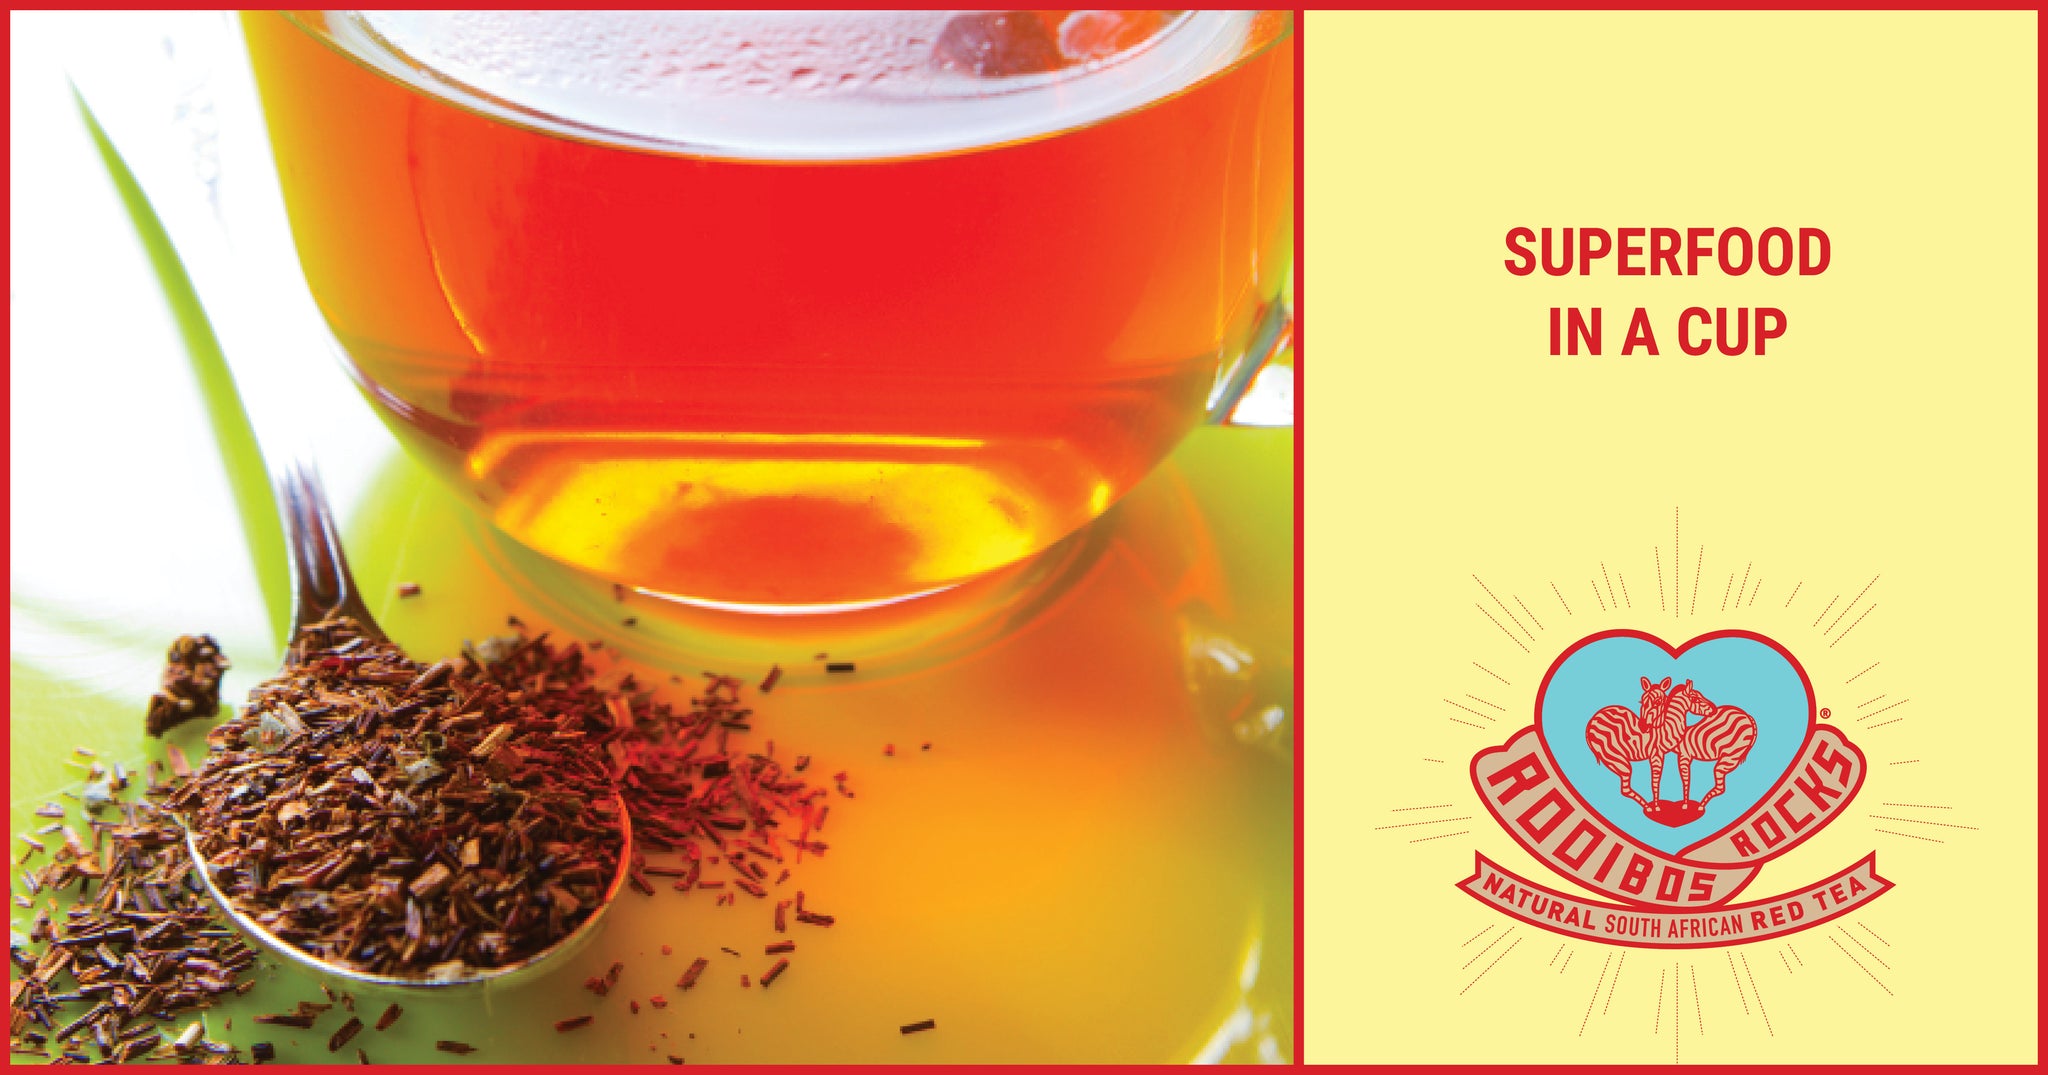 Rooibos is a superfood